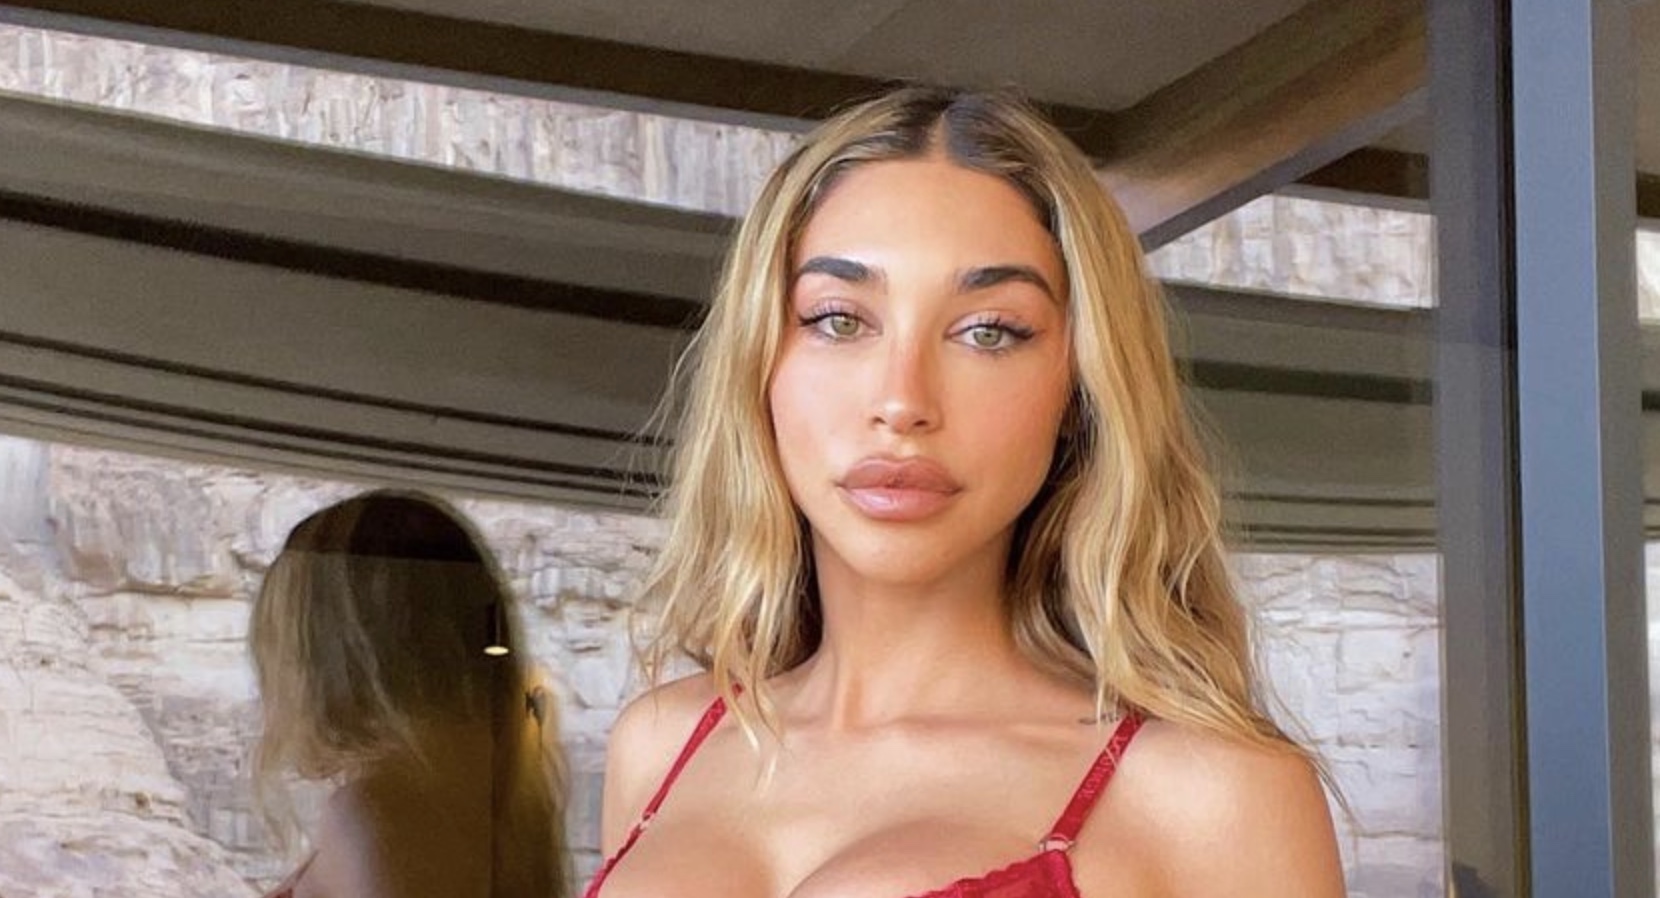 andy singer recommends chantel jeffries tits pic